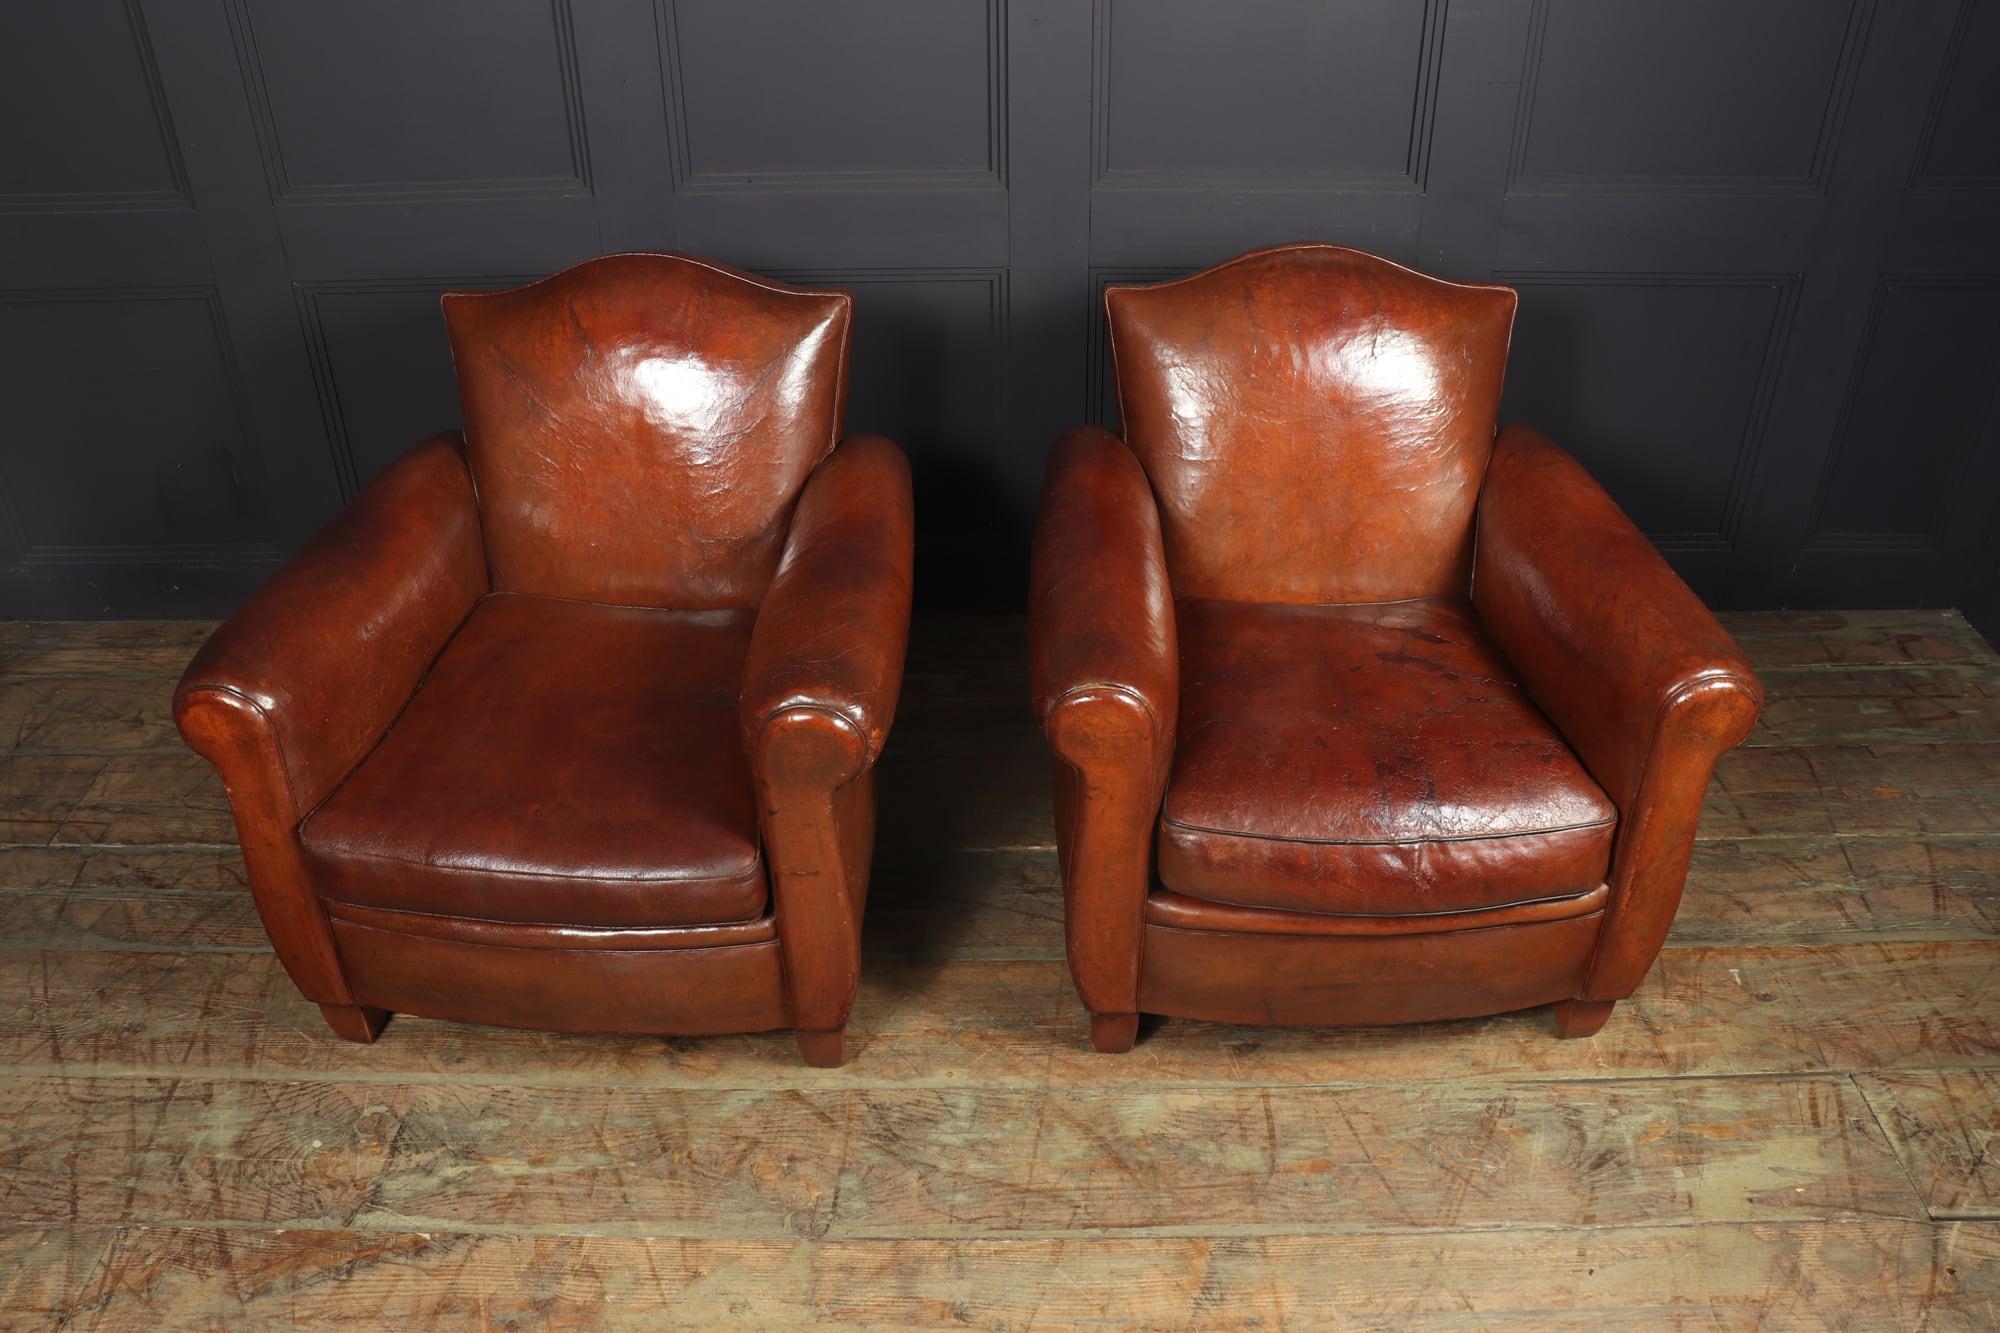 A lovely pair of original French leather camel back club chairs in very well preserved condition with light restoration and full leather treatment the chairs have great patina on a chestnut brown leather

Age: 1930

Style: French

Material: